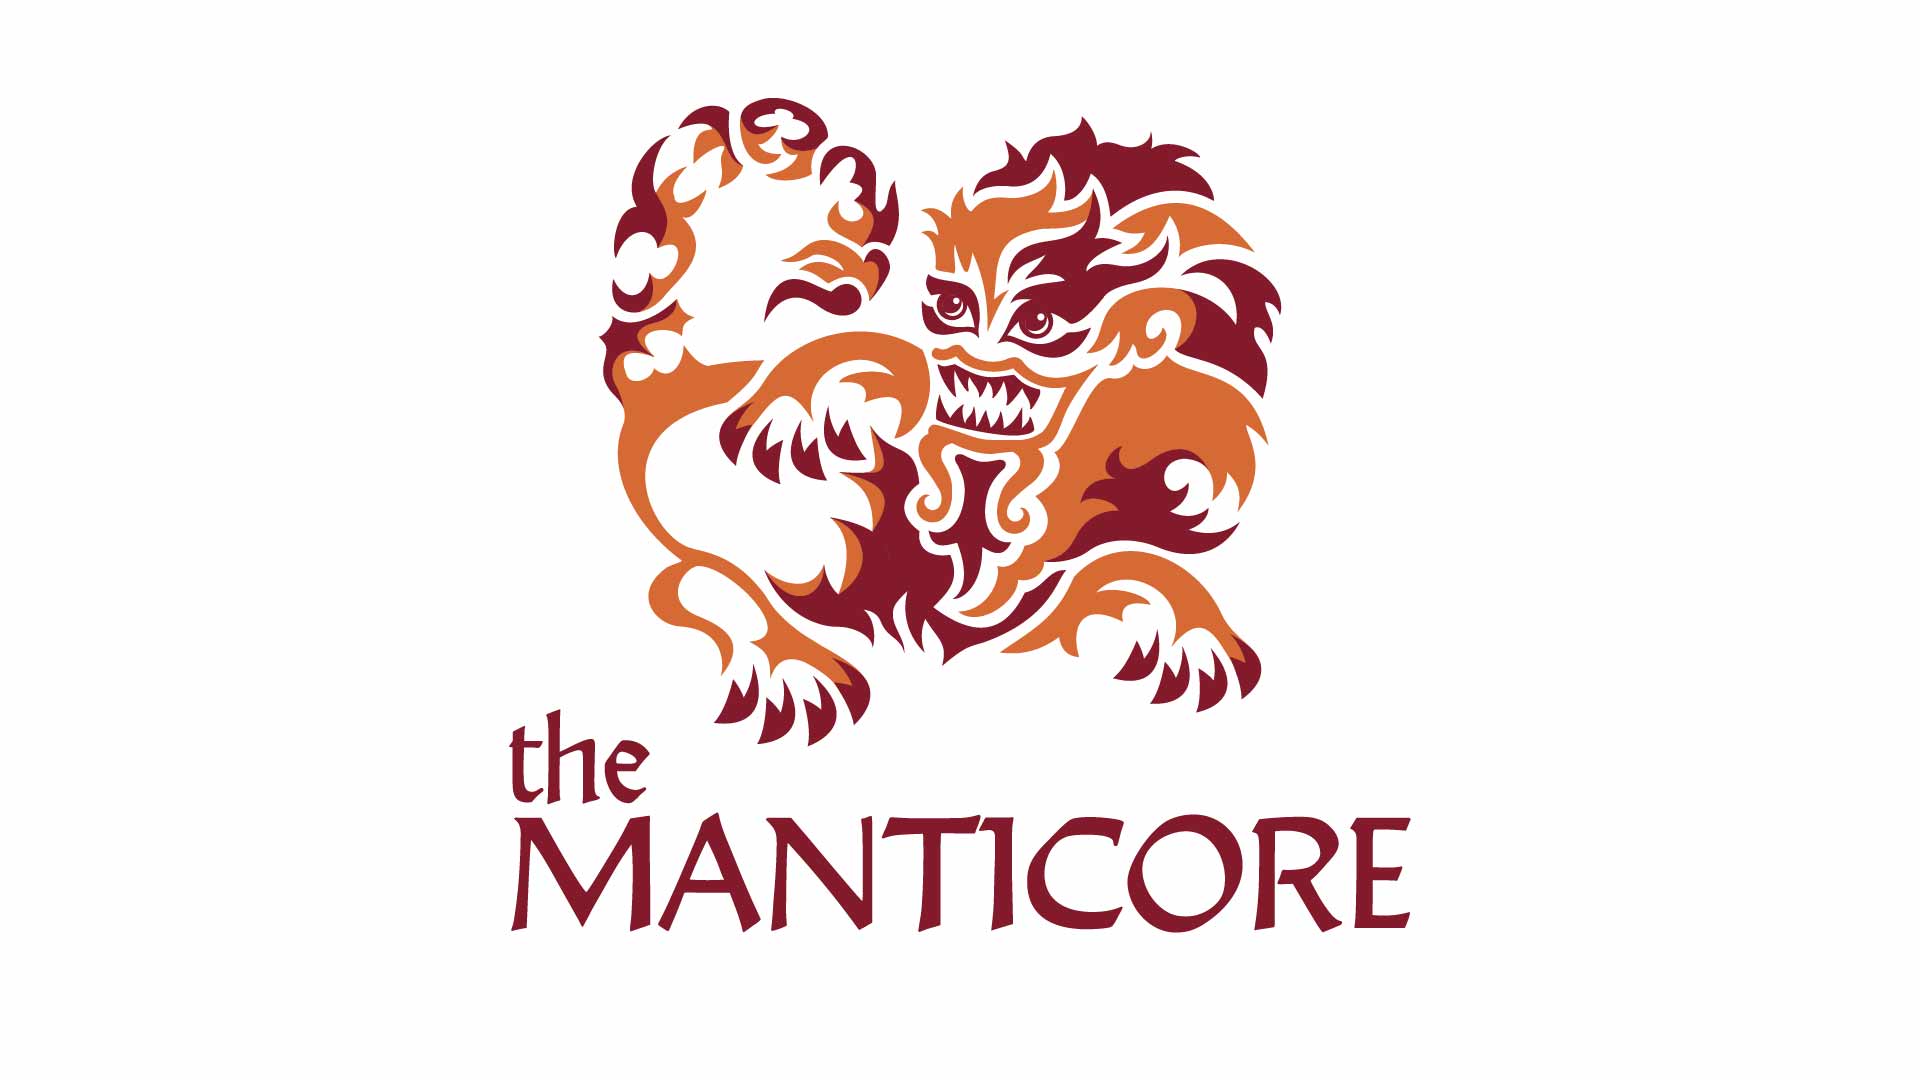 An image of created manticore symbol.